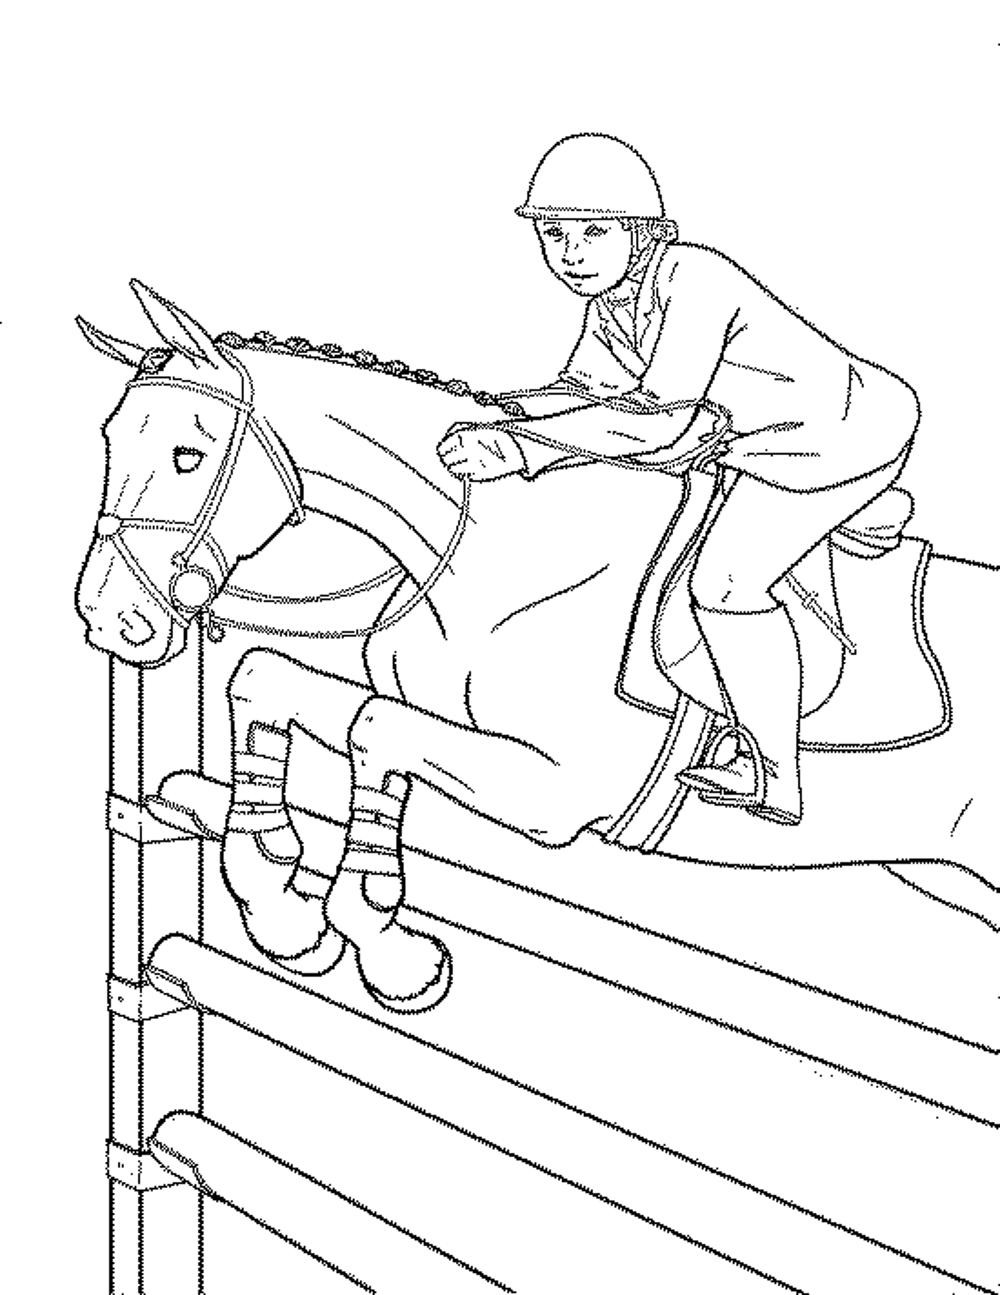 Horse Coloring Pages For Kids
 Fun Horse Coloring Pages for Your Kids Printable